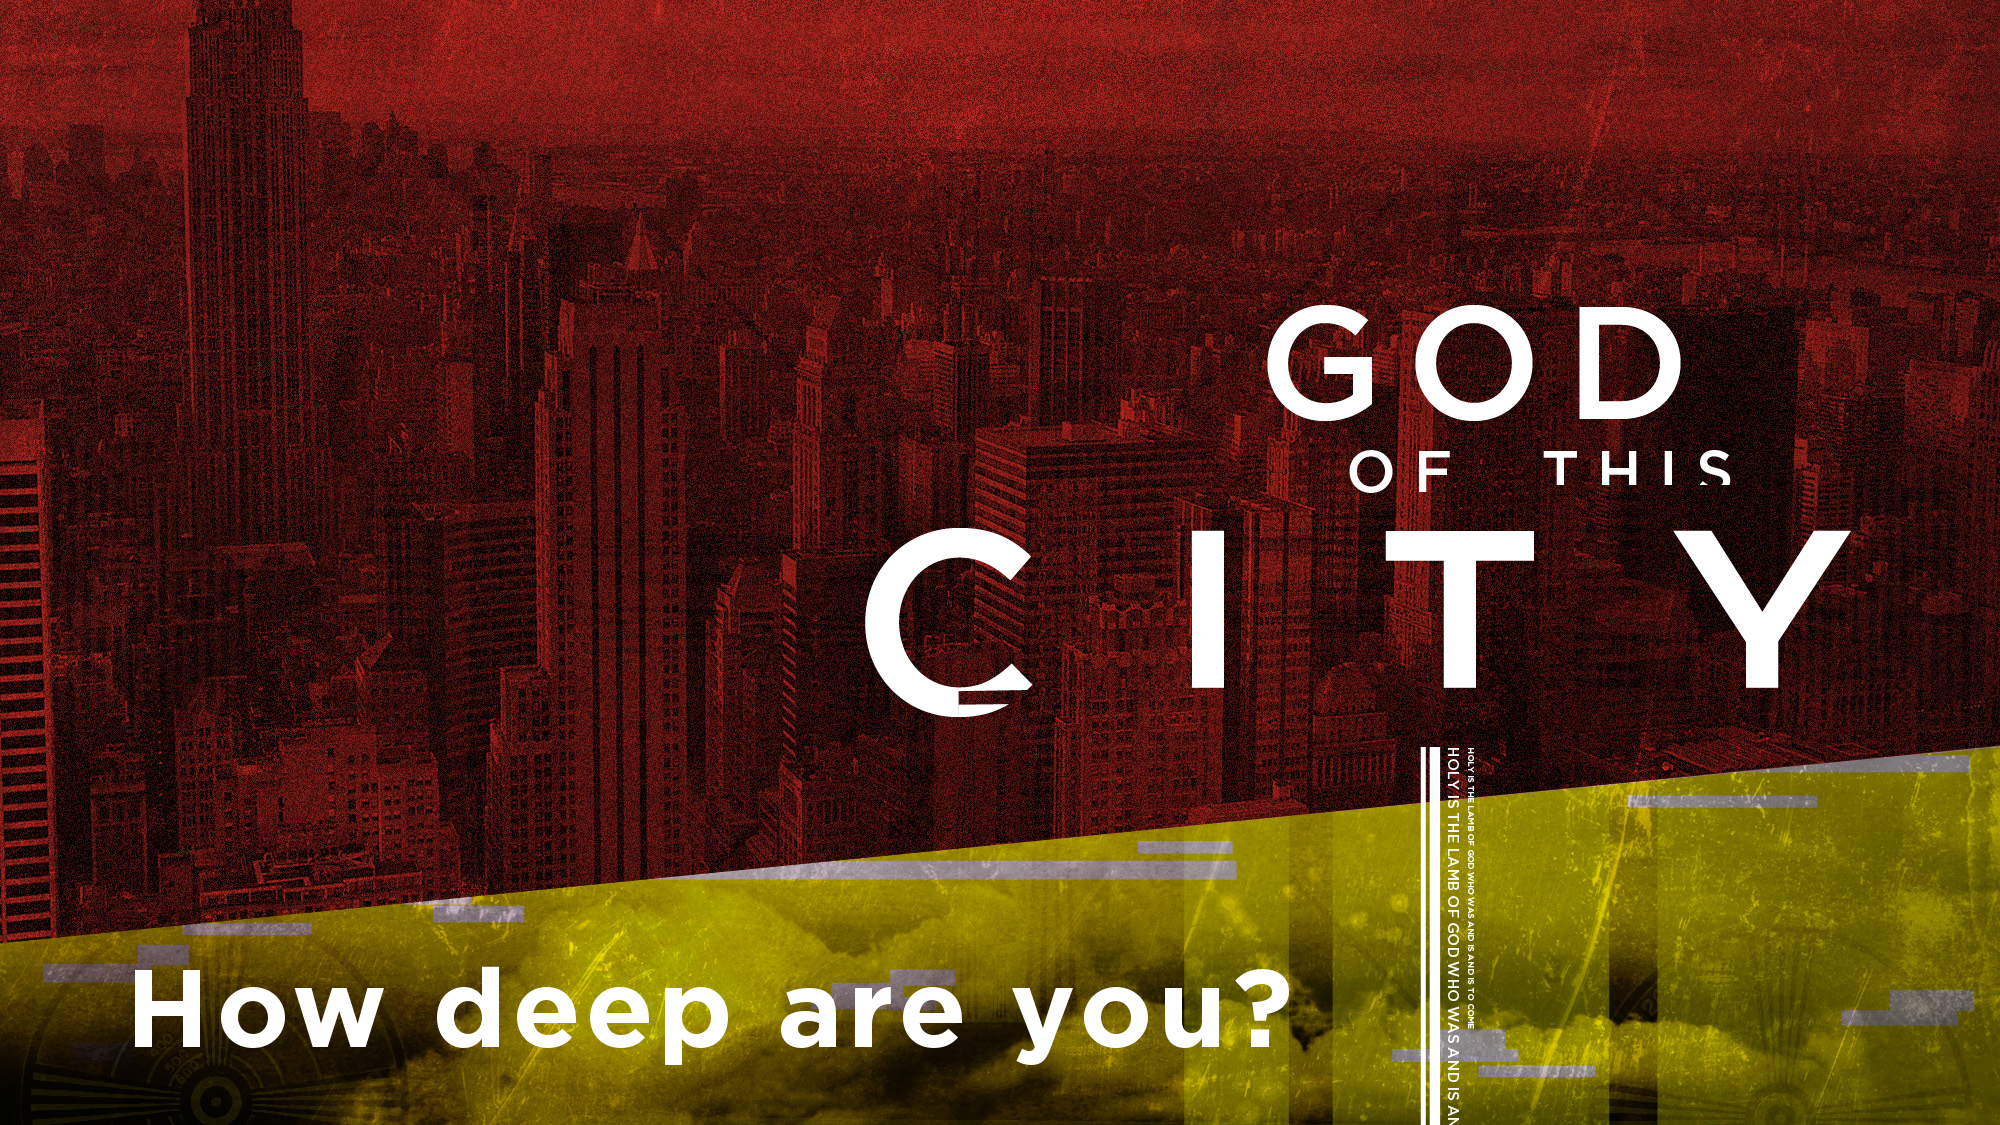 God of this City - How deep are you?